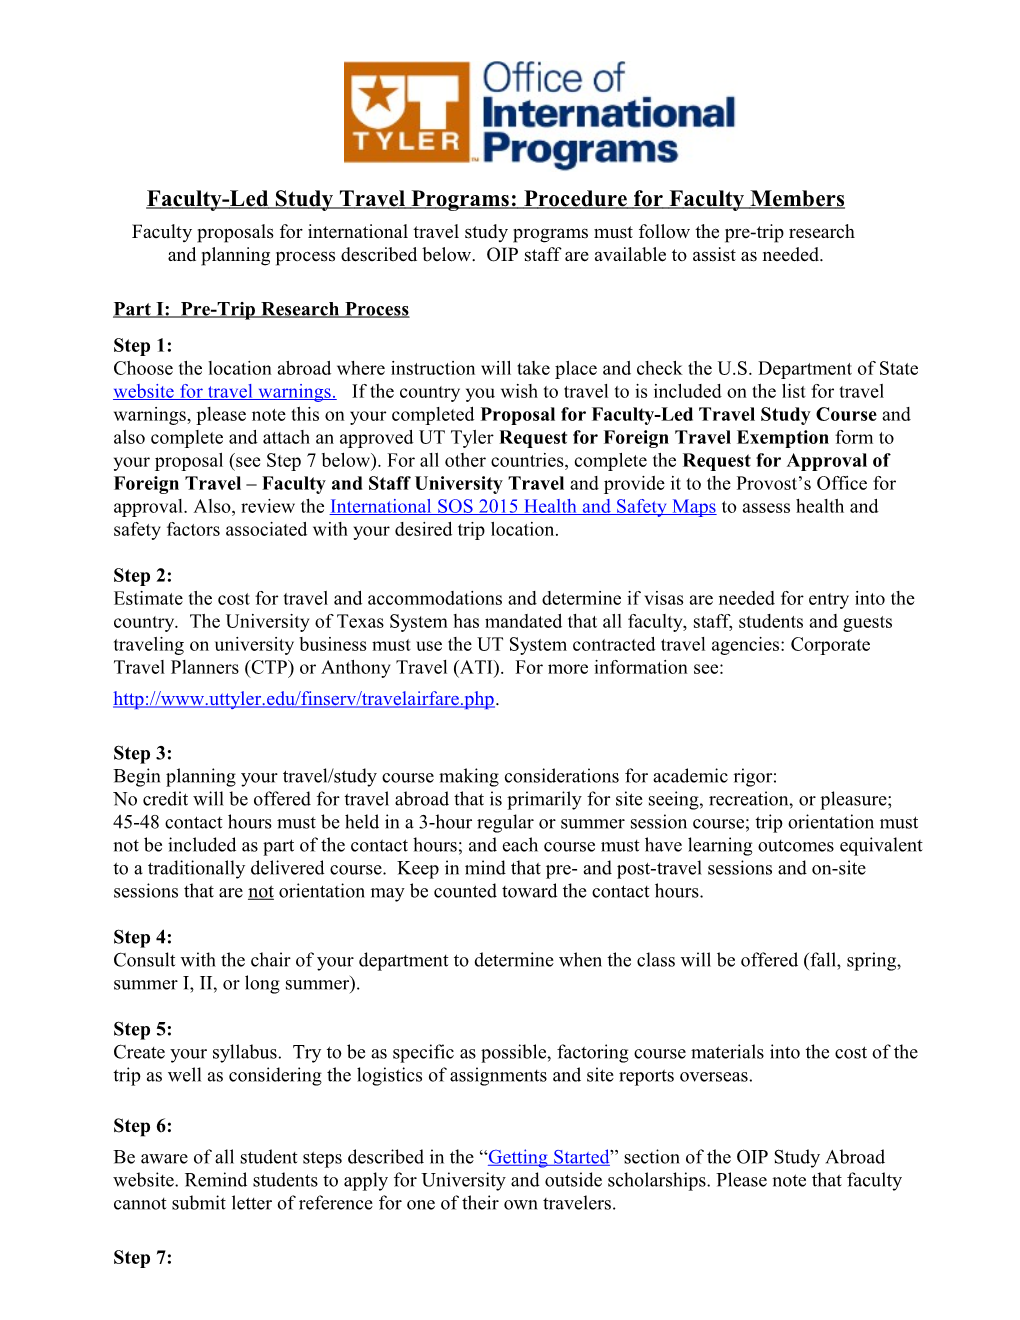 Faculty-Led Study Travel Programs: Procedure for Faculty Members